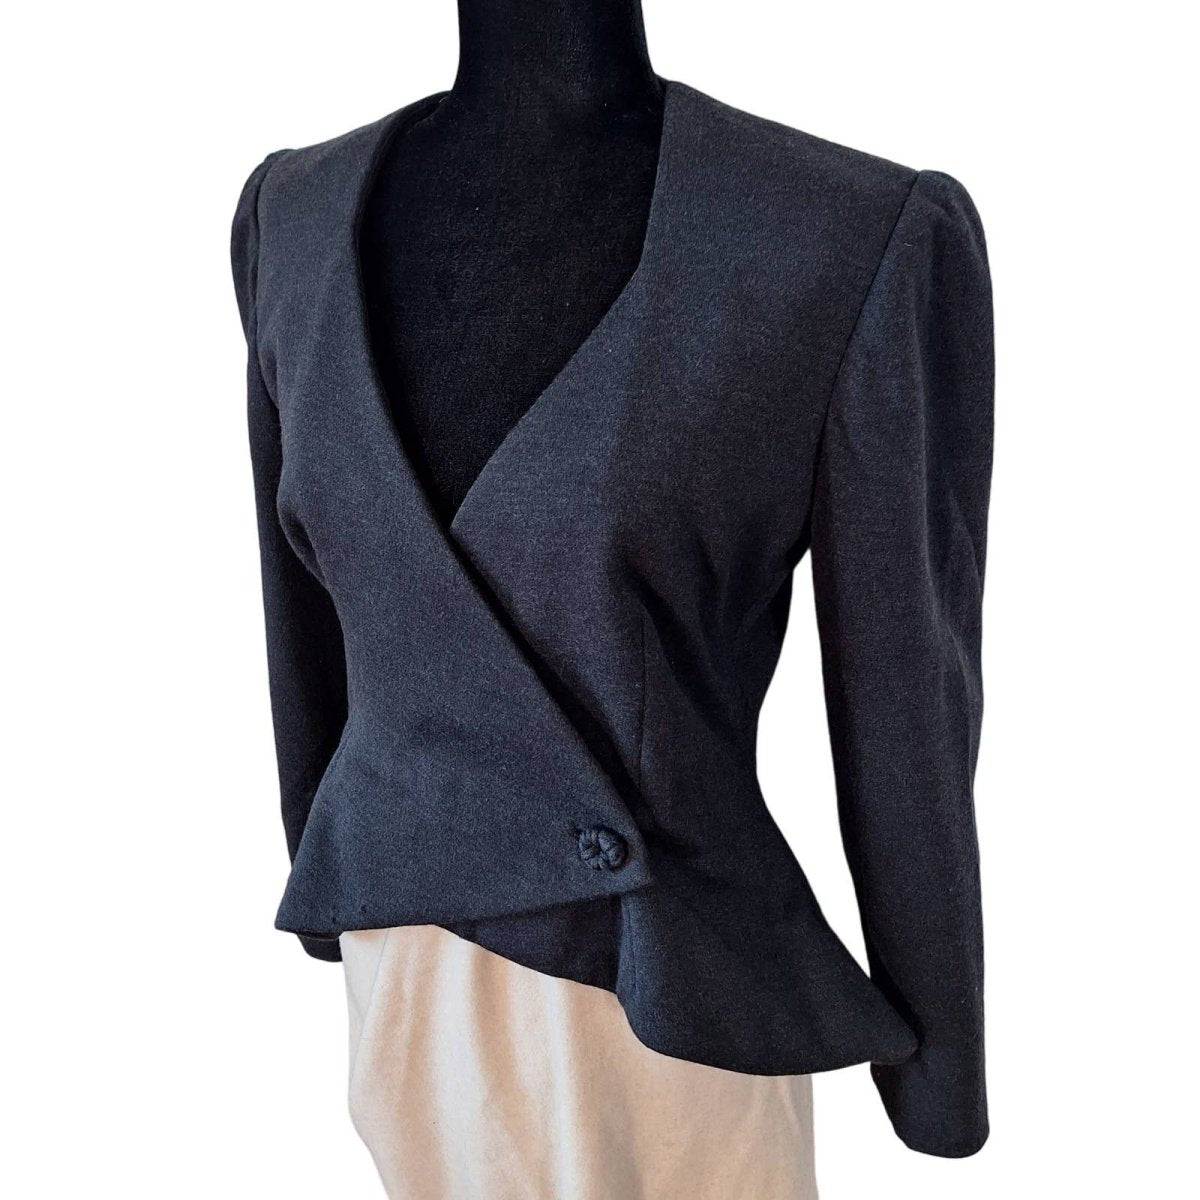 Vintage 80s Wool Double Breasted Peplum Jacket Size 8/10 Chest 40" - 42" Waist 32" - themallvintage The Mall Vintage